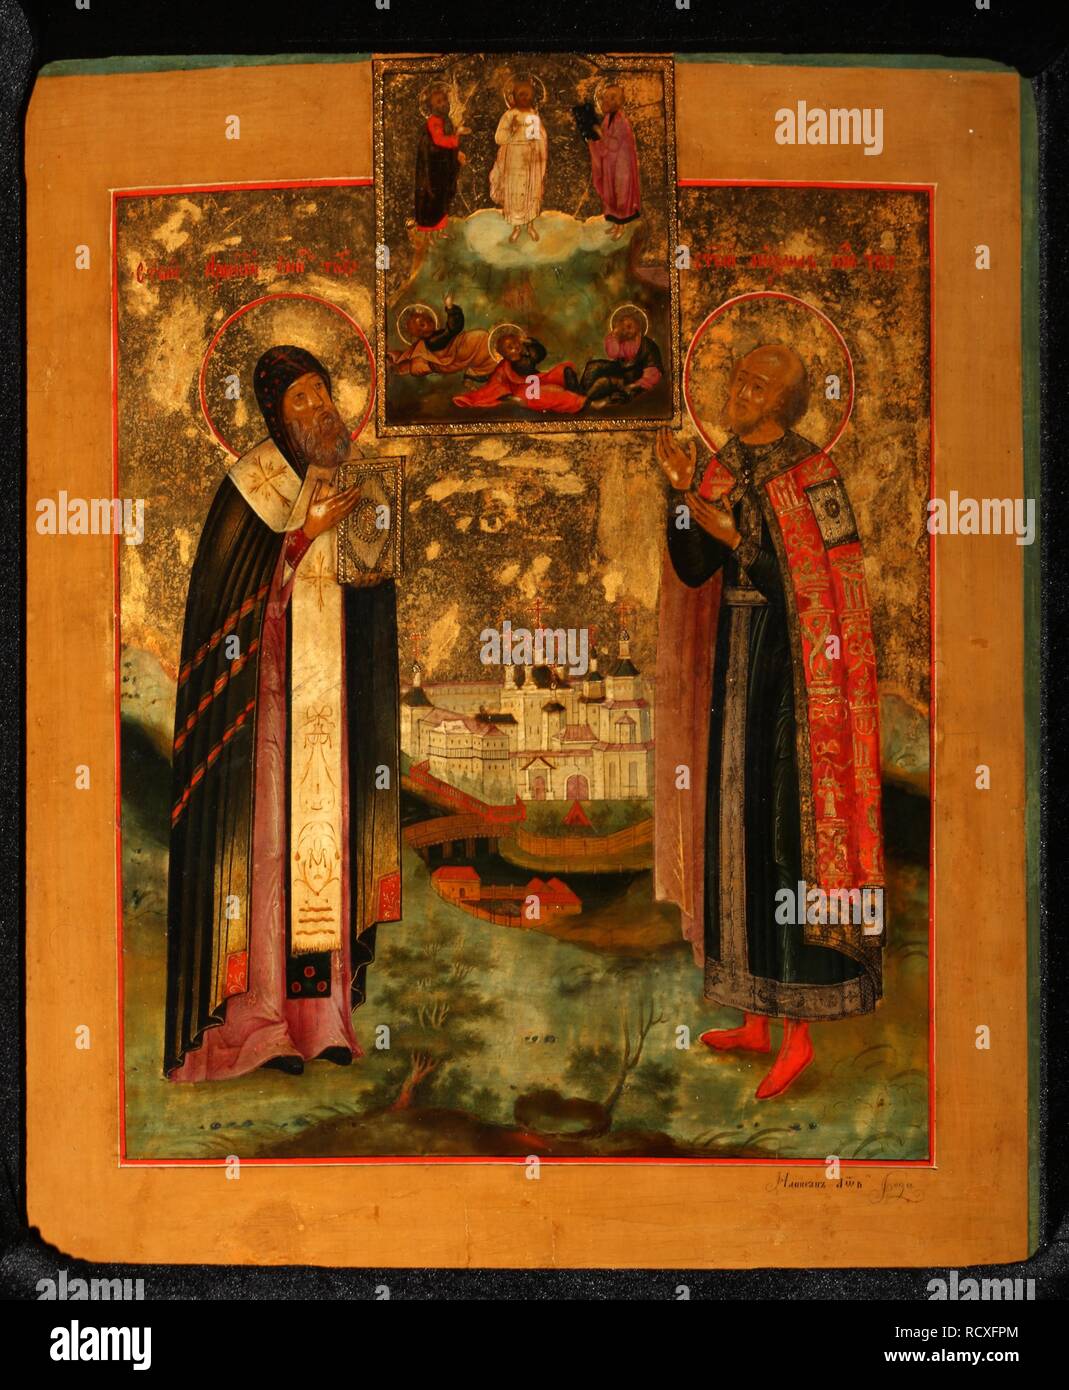 Saints Bishop Arsenius of Tver and Prince Michael of Tver. Museum: PRIVATE COLLECTION. Author: Russian icon. Stock Photo